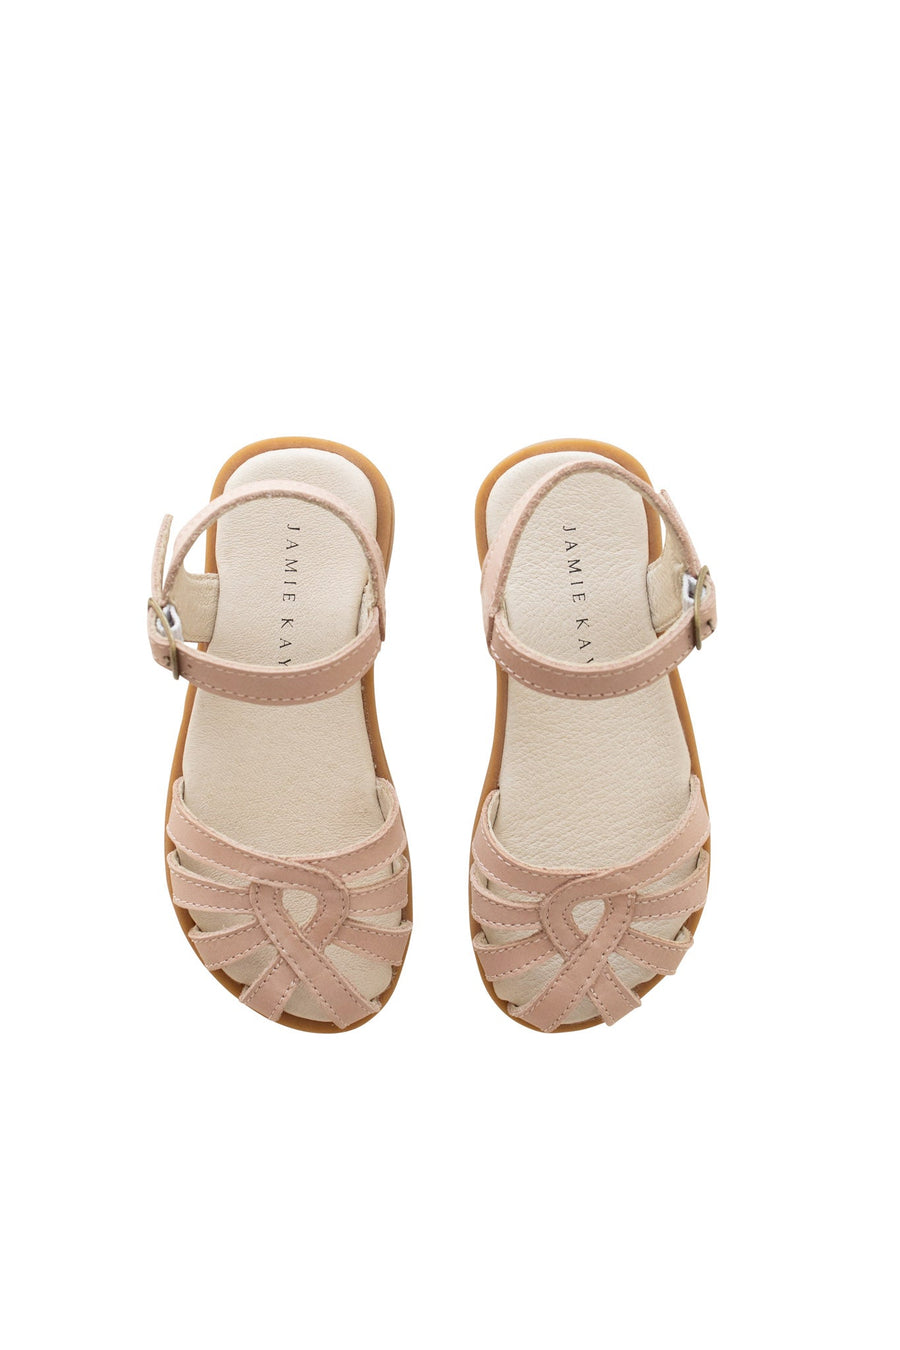 Leather Sandal - Blush Childrens Footwear from Jamie Kay USA